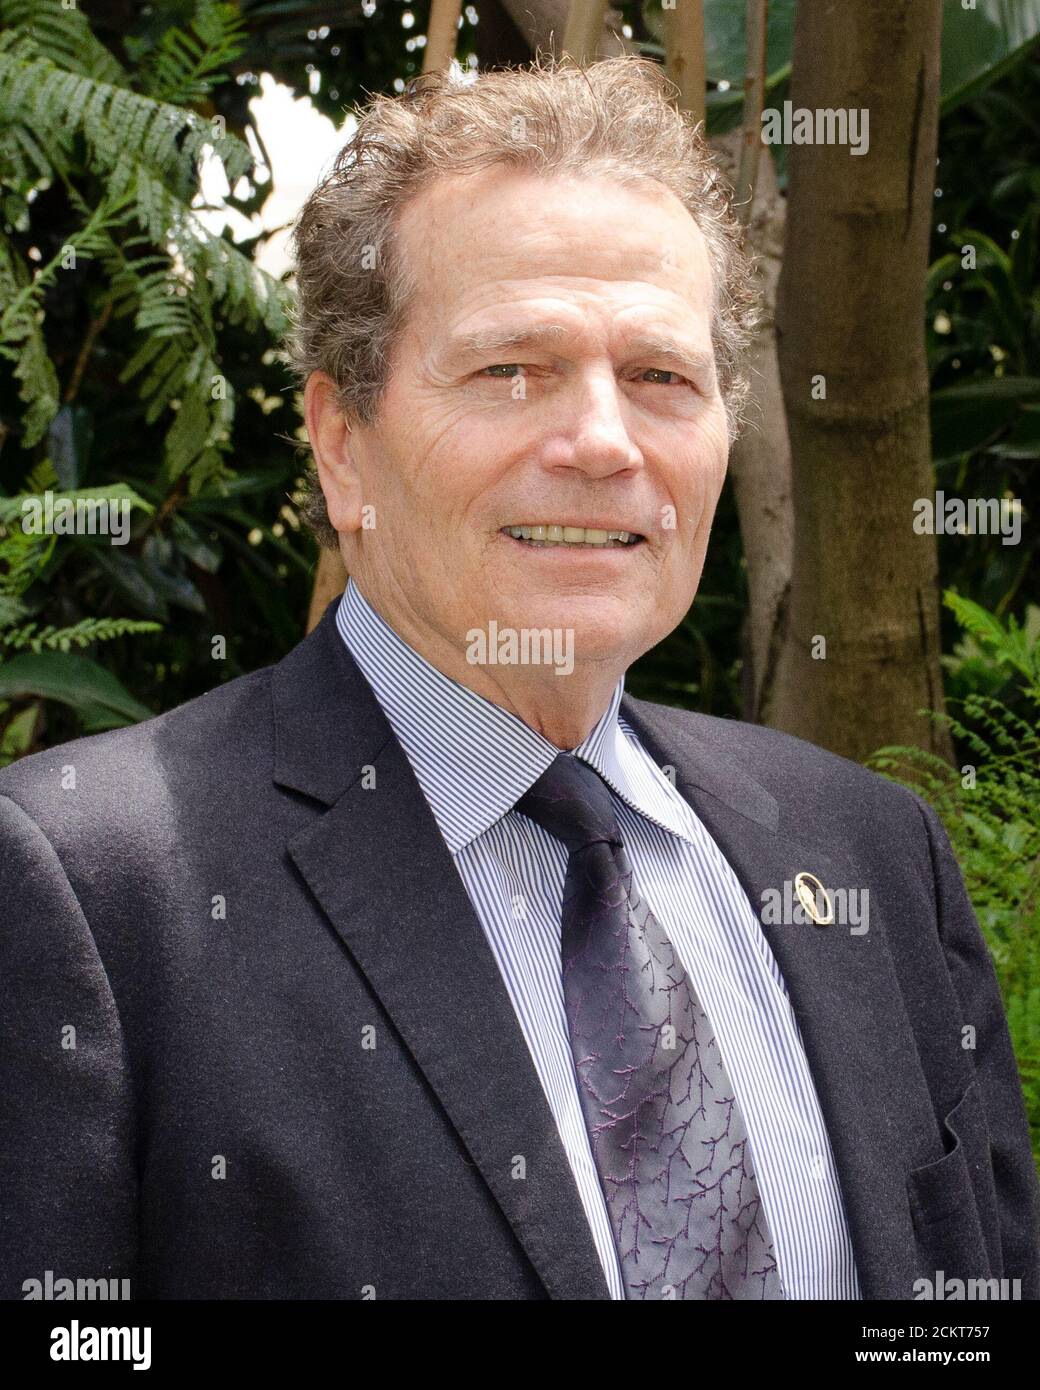 May 7, 2014, Beverly Hills, California, USA: Patrick Wayne attneds the ABCs Mother's Day Luncheon. (Credit Image: © Billy Bennight/ZUMA Wire) Stock Photo